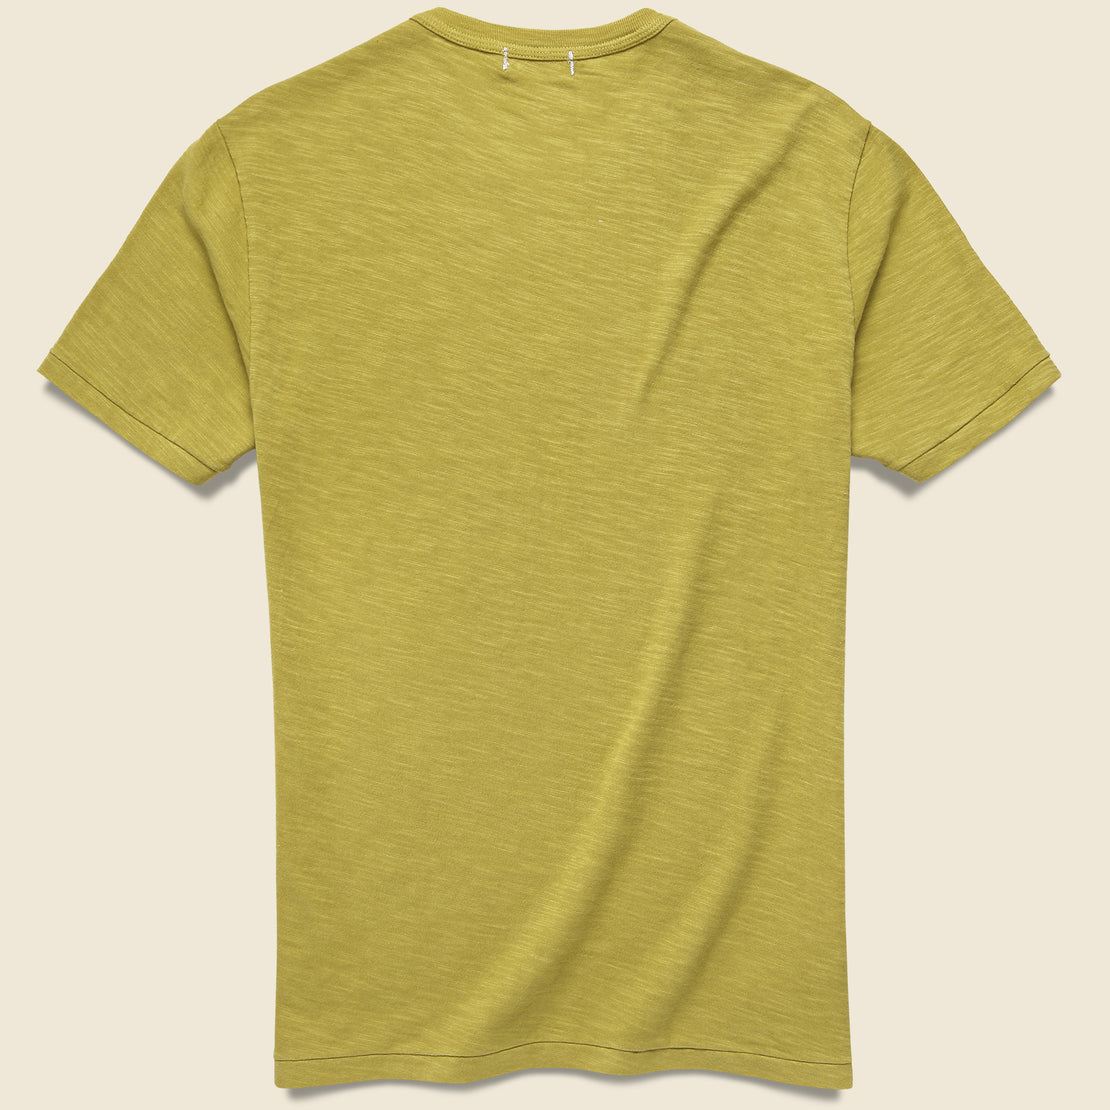 Standard Crew Tee - Golden Olive - Alex Mill - STAG Provisions - Tops - S/S Tee